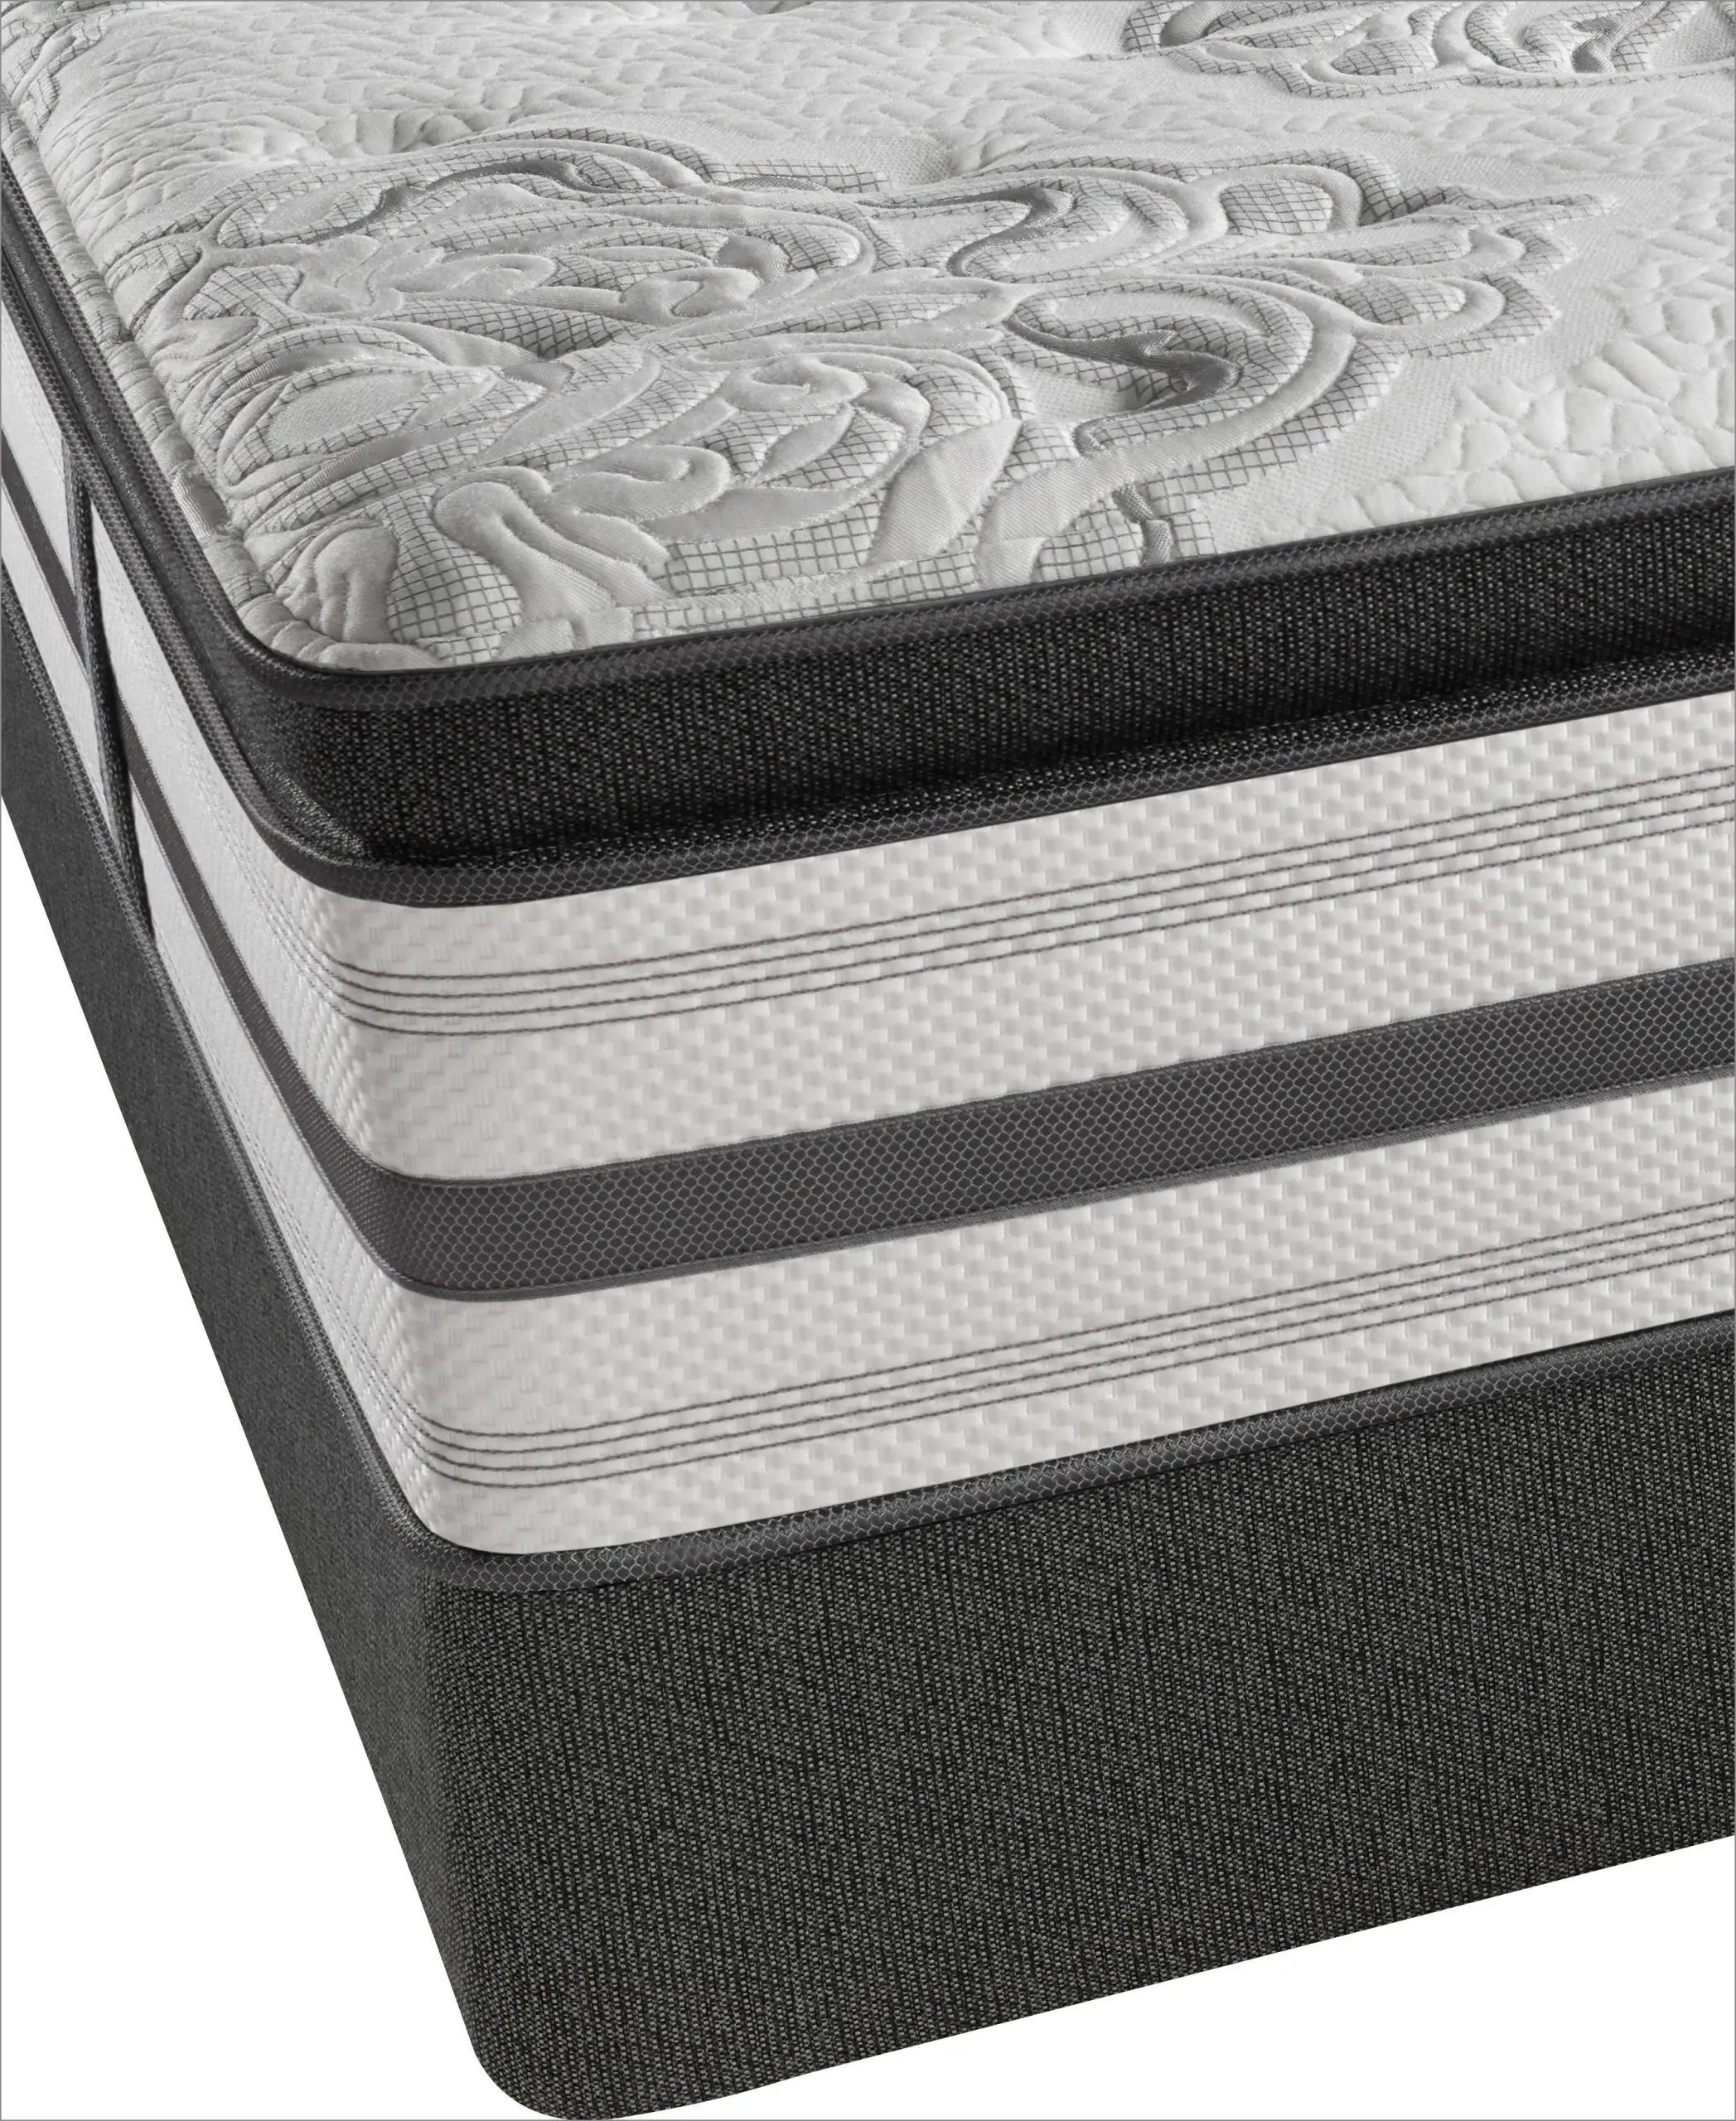 Beauty Rest Black Mattress Check more at https://www.cdomakis ...